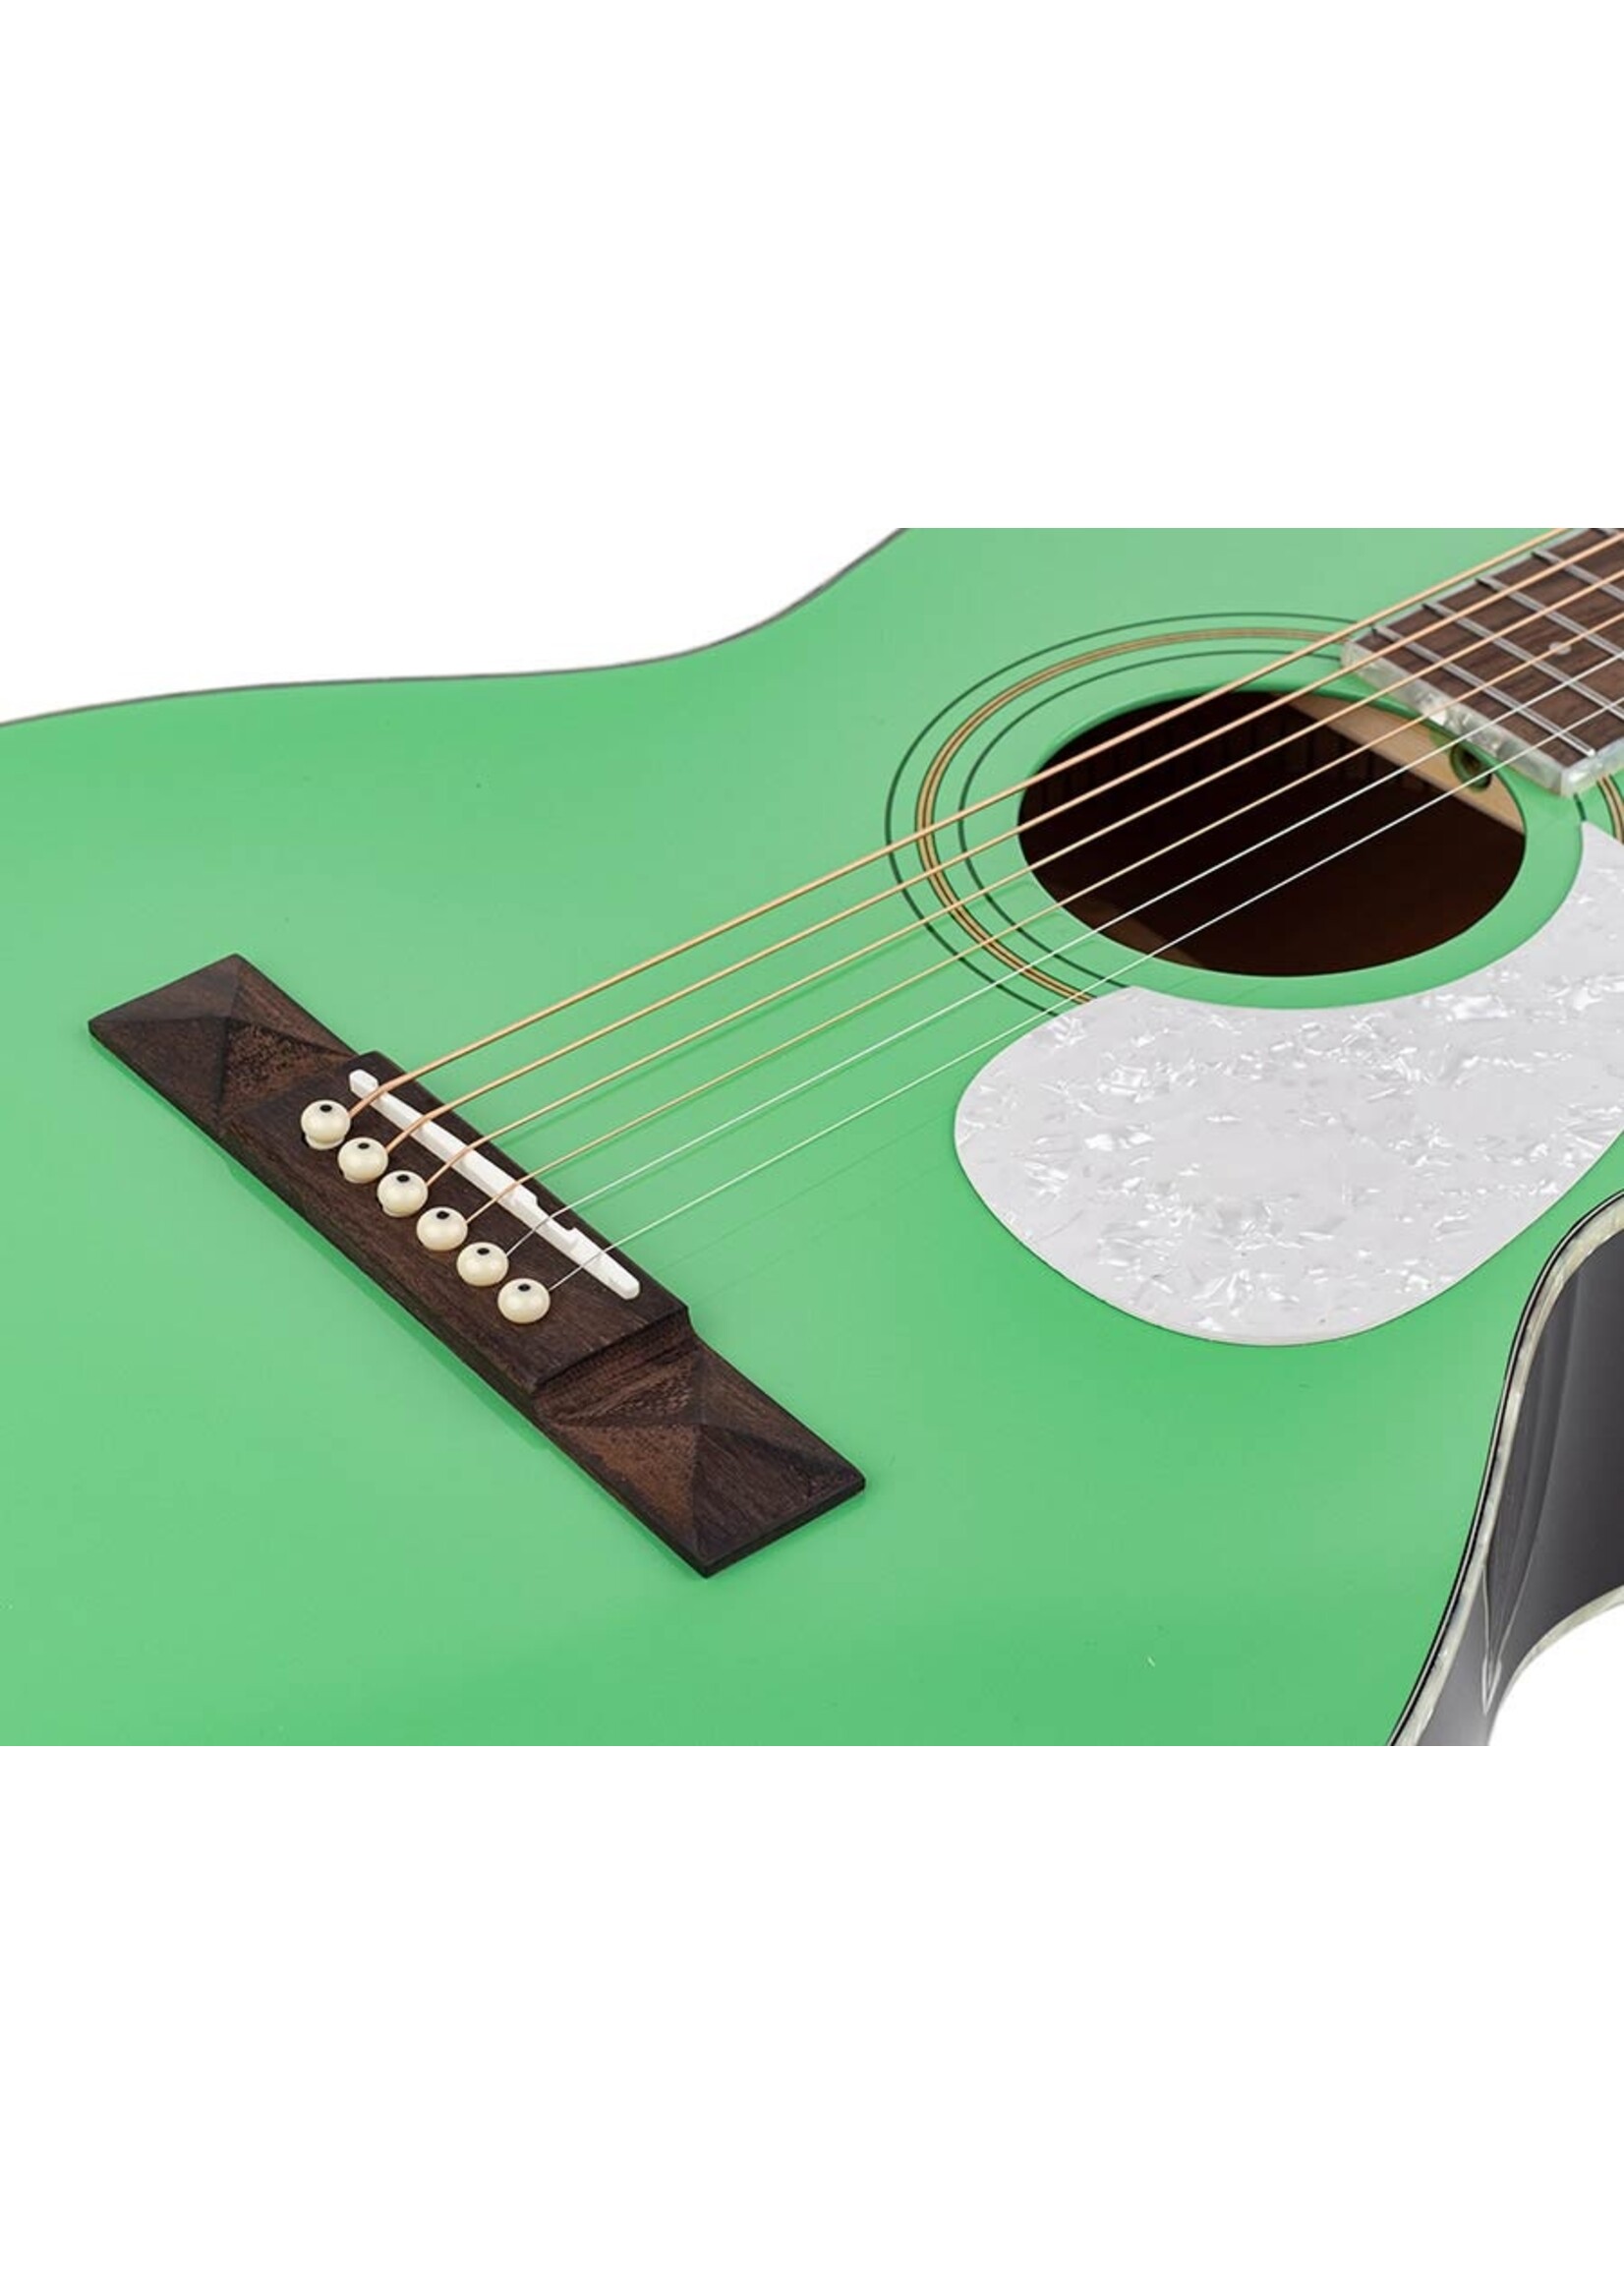 Richwood Richwood HSP-55-GN Heritage Series parlor guitar with solid spruce top, mint Green